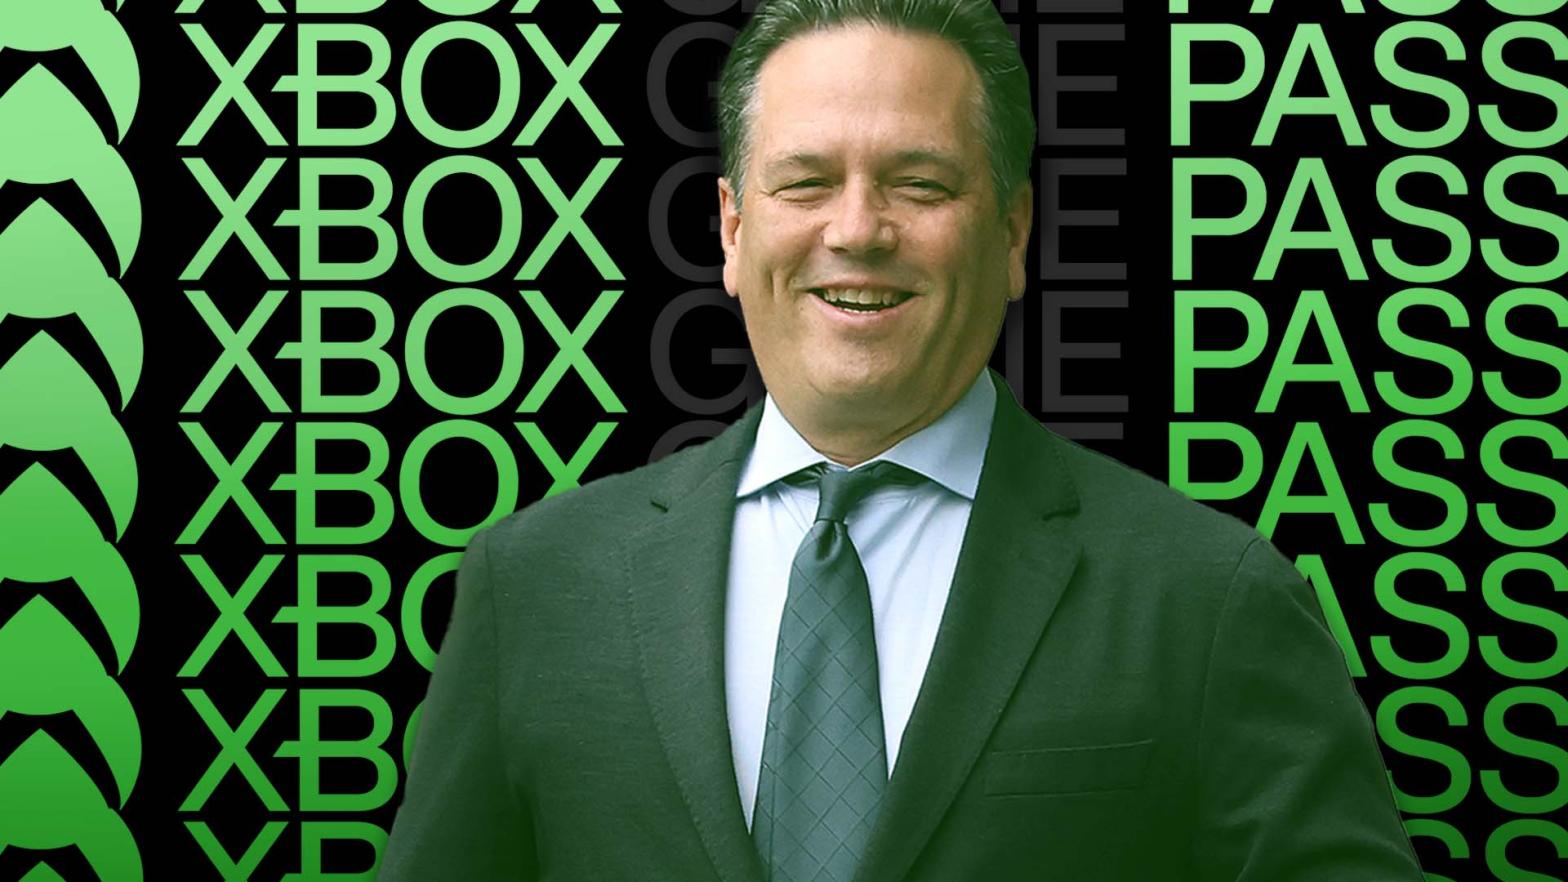 It’s Time To Stop Giving Xbox Boss Phil Spencer A Pass